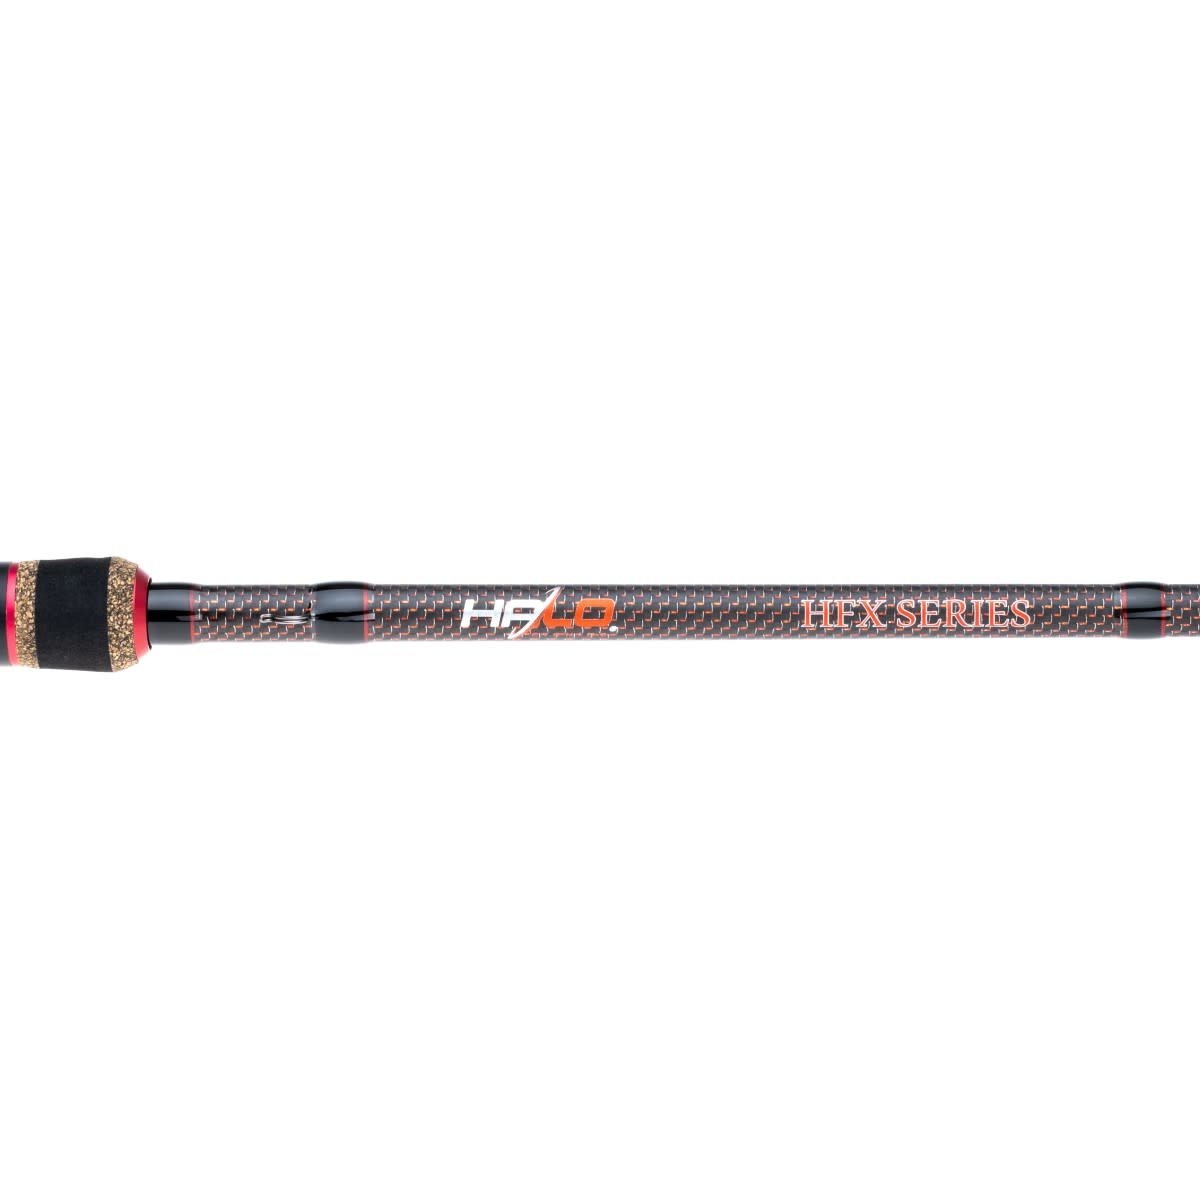 HFX Spinning Rod - Modern Outdoor Tackle